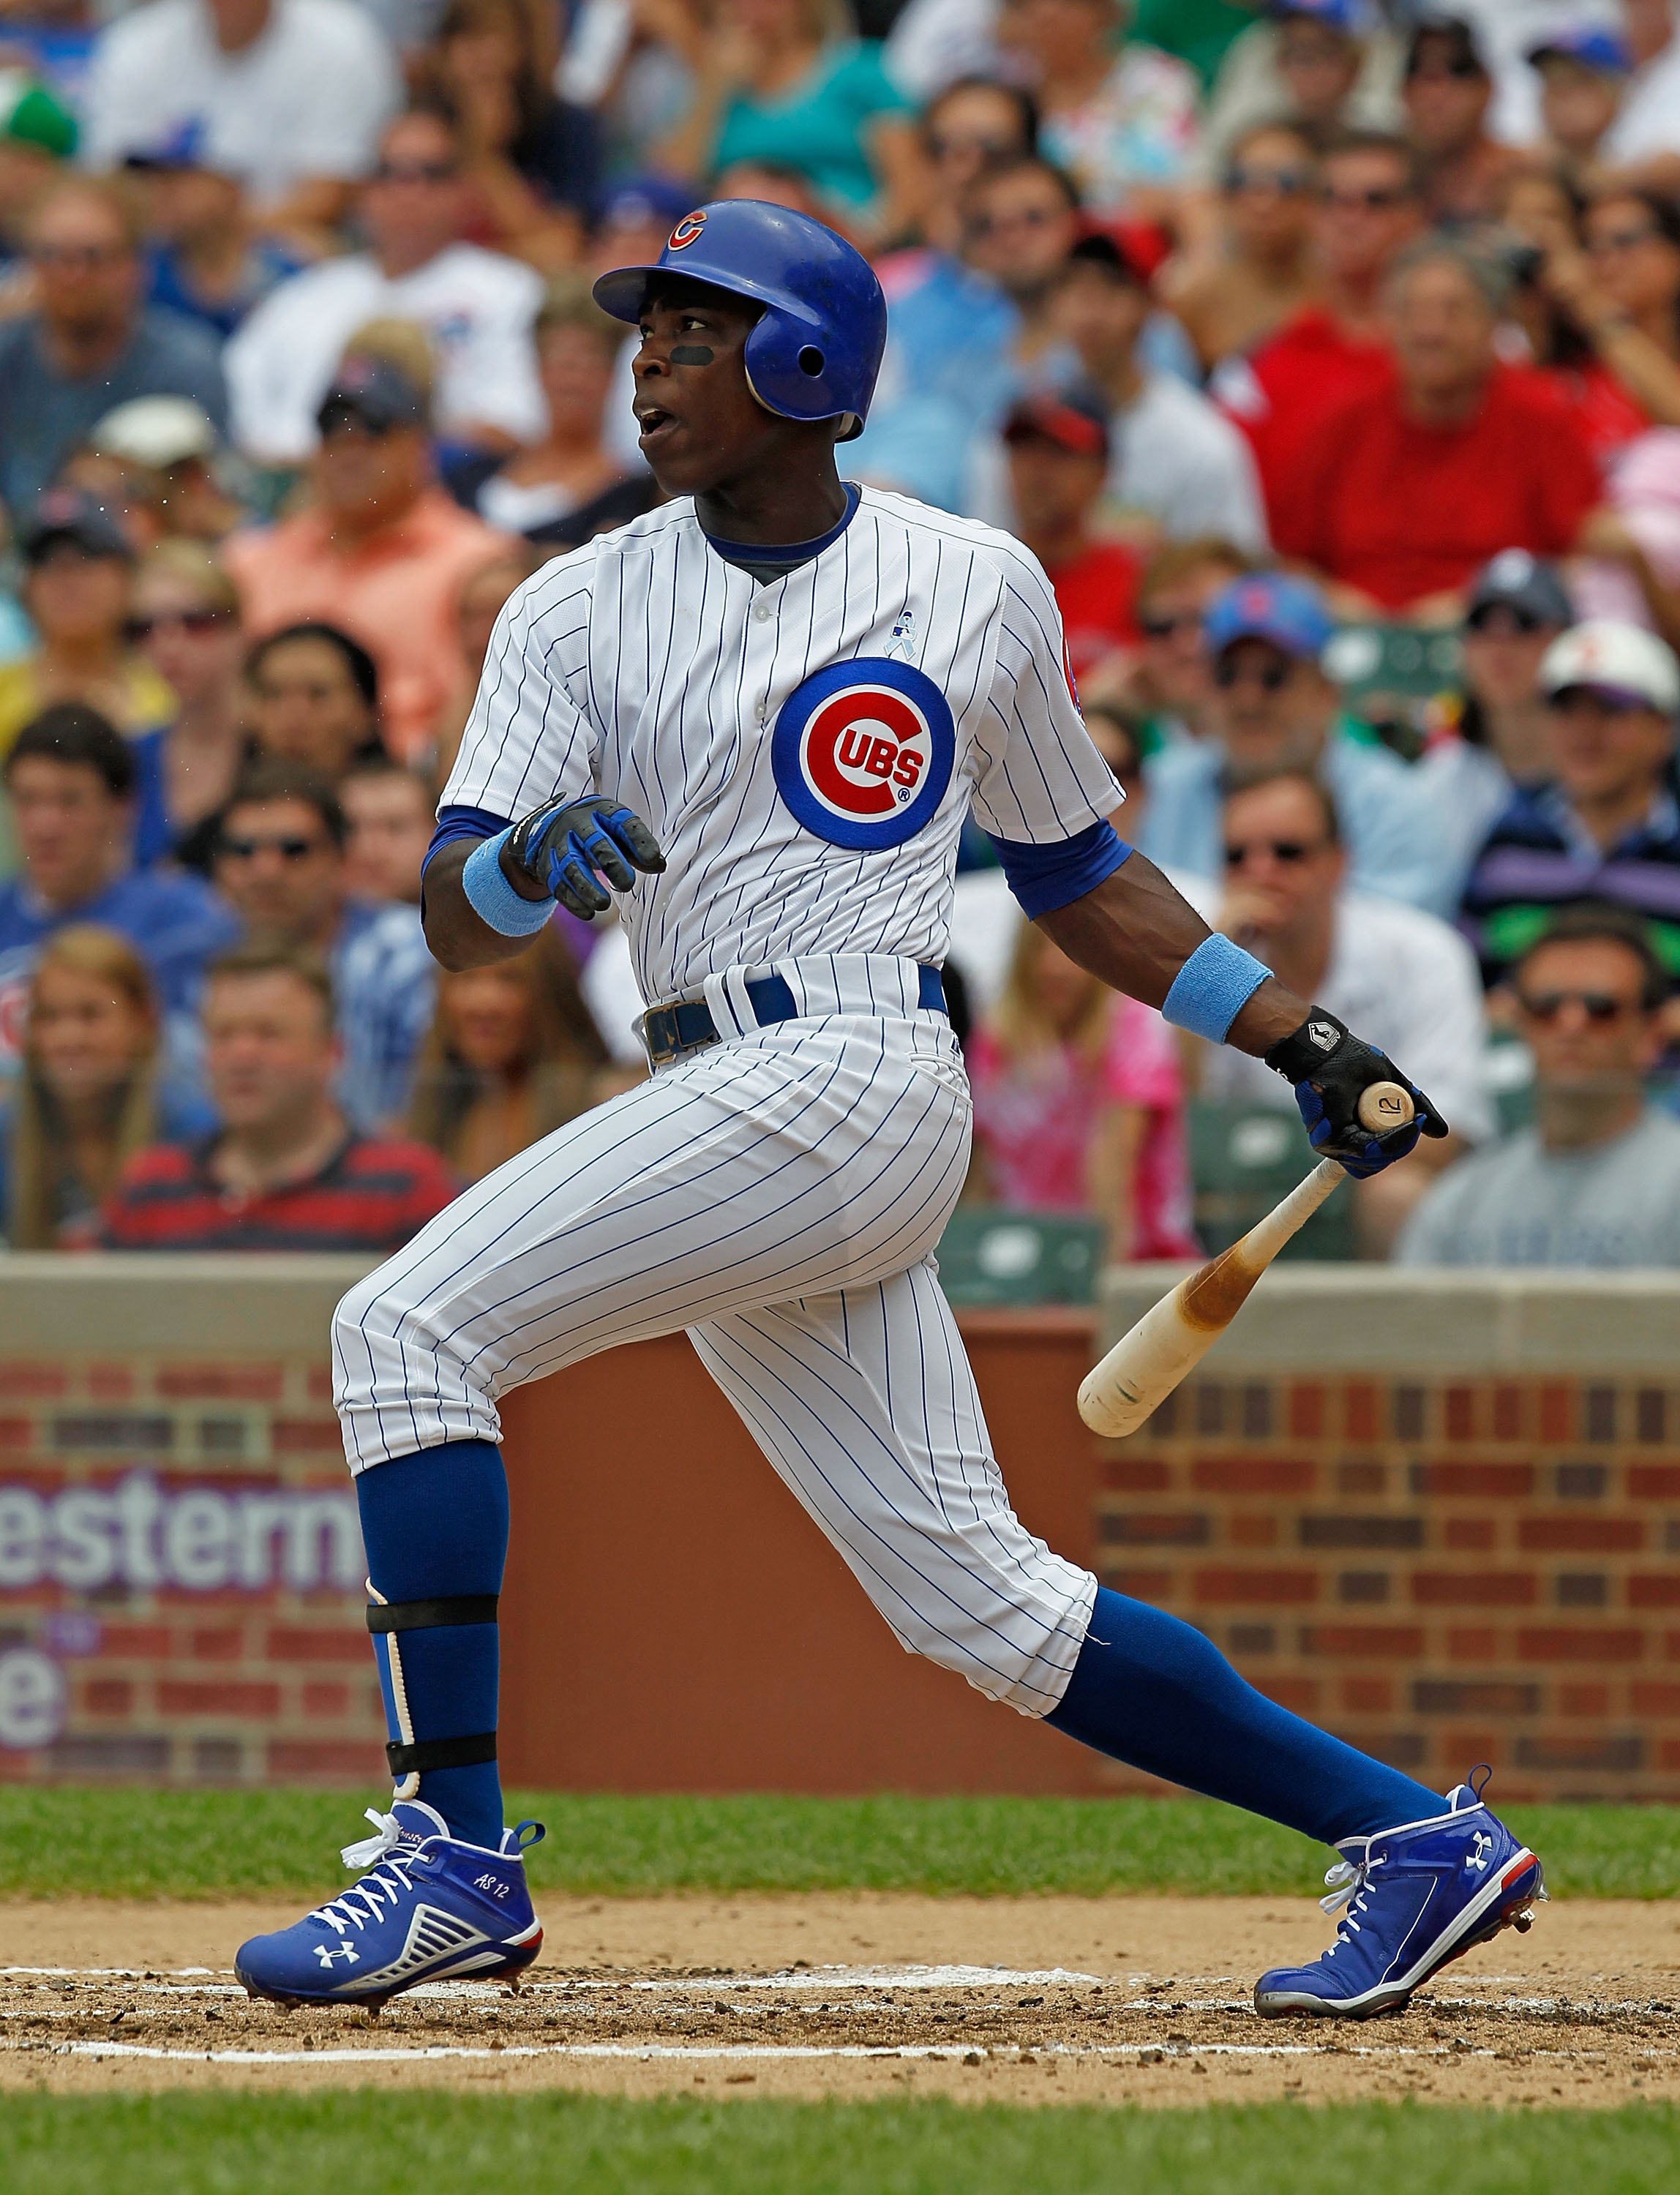 CHICAGO - JUNE 20: Alfonso Soriano #12 of the Chicago Cubs hits the ball against the Los Angeles Angels of Anaheim at Wrigley Field on June 20, 2010 in Chicago, Illinois. The Cubs defeated the Angels 12-1. (Photo by Jonathan Daniel/Getty Images)